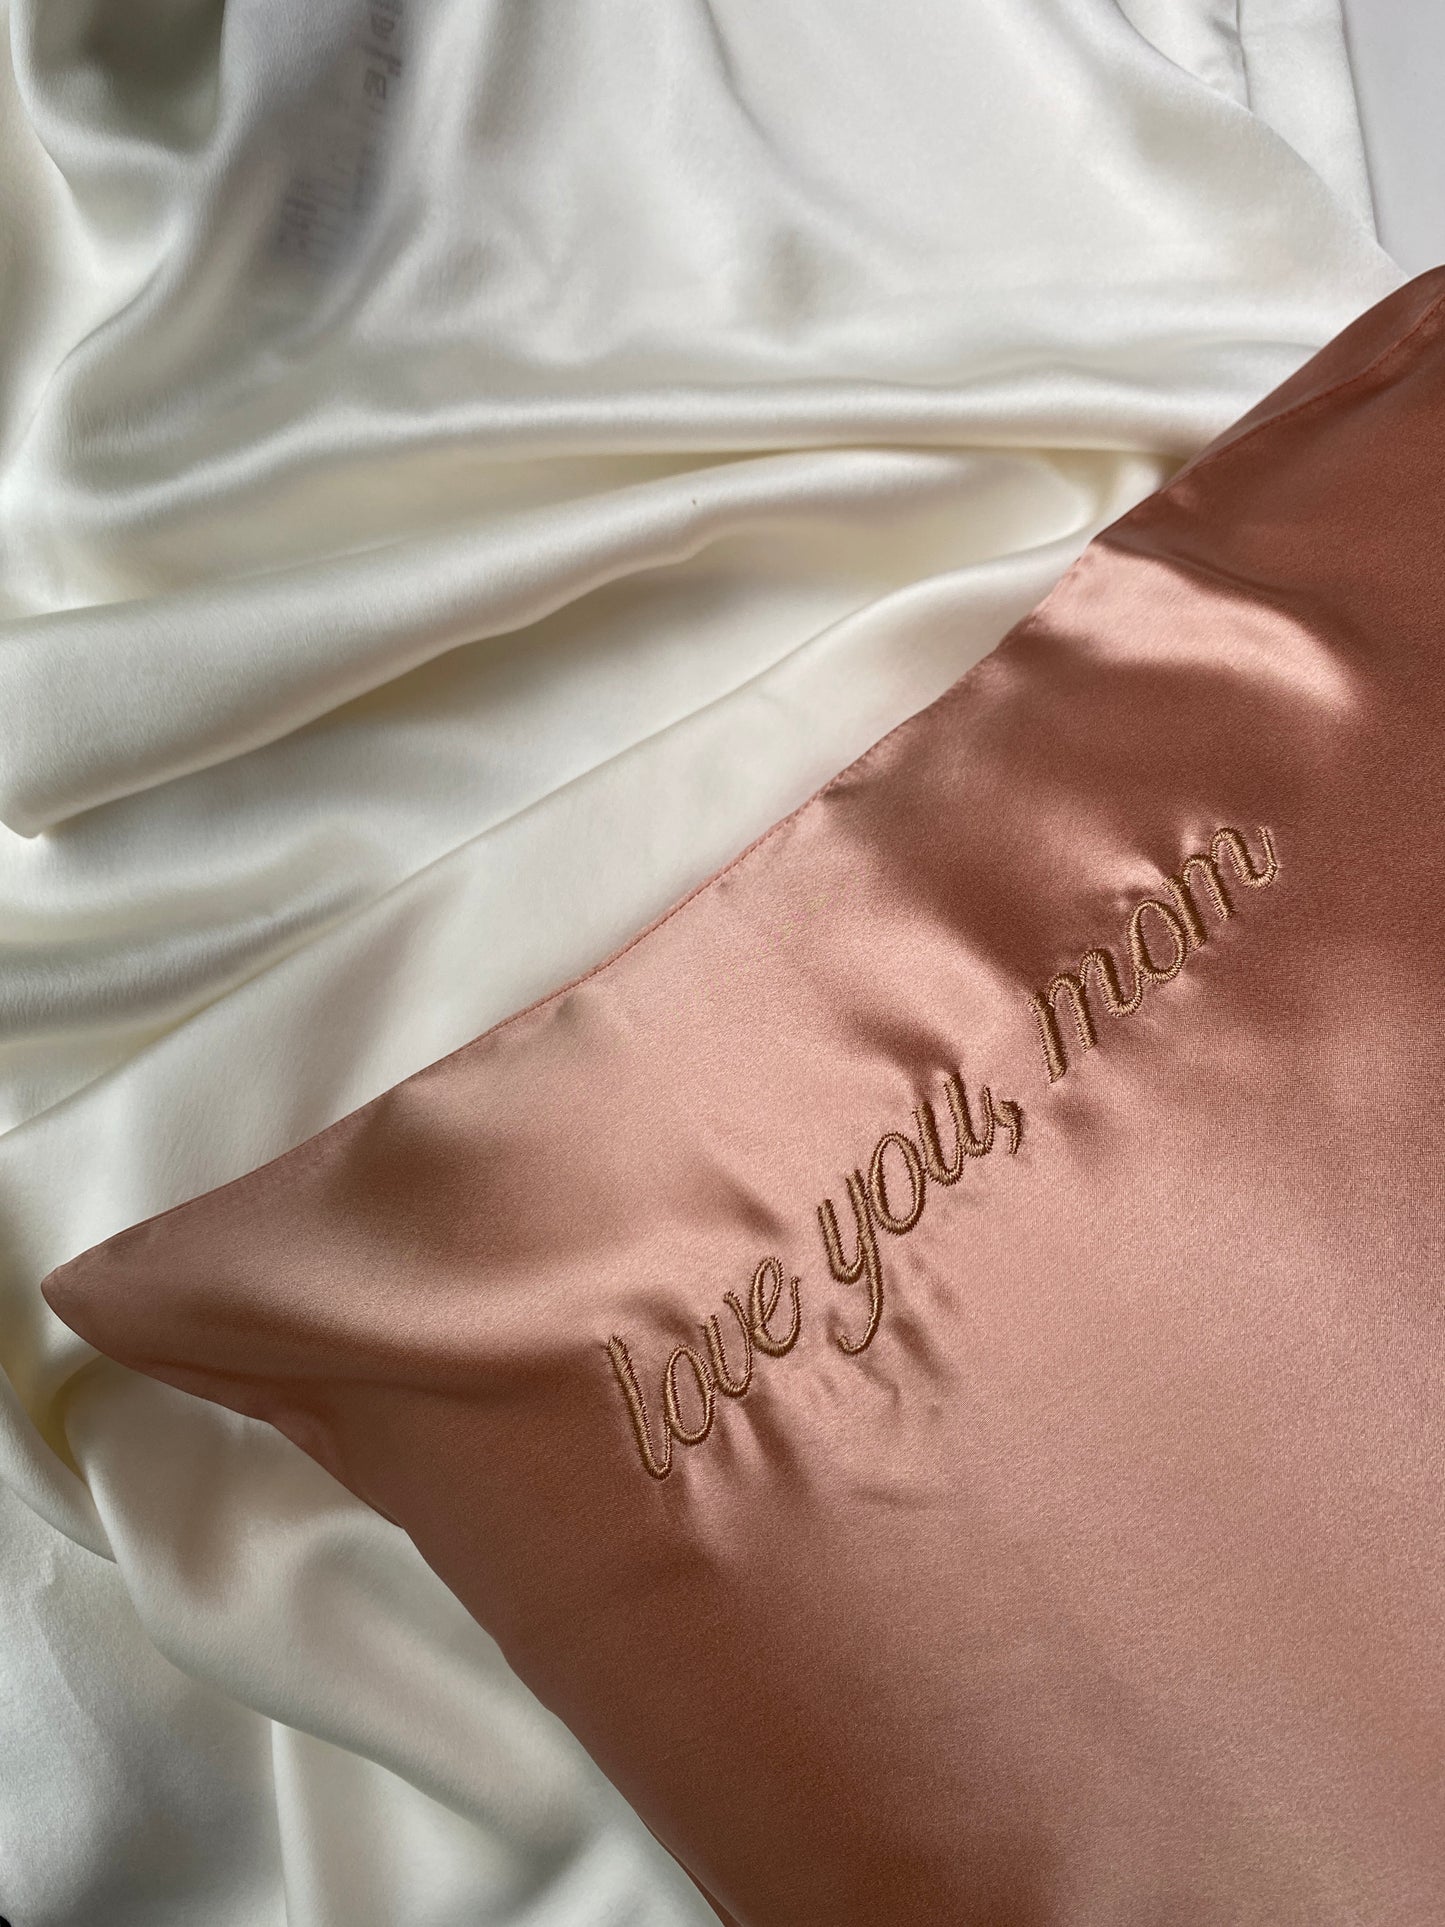 Make this gift extra special by personalising your silk mask and pillowcase with our embroidery services with a customised name or message.